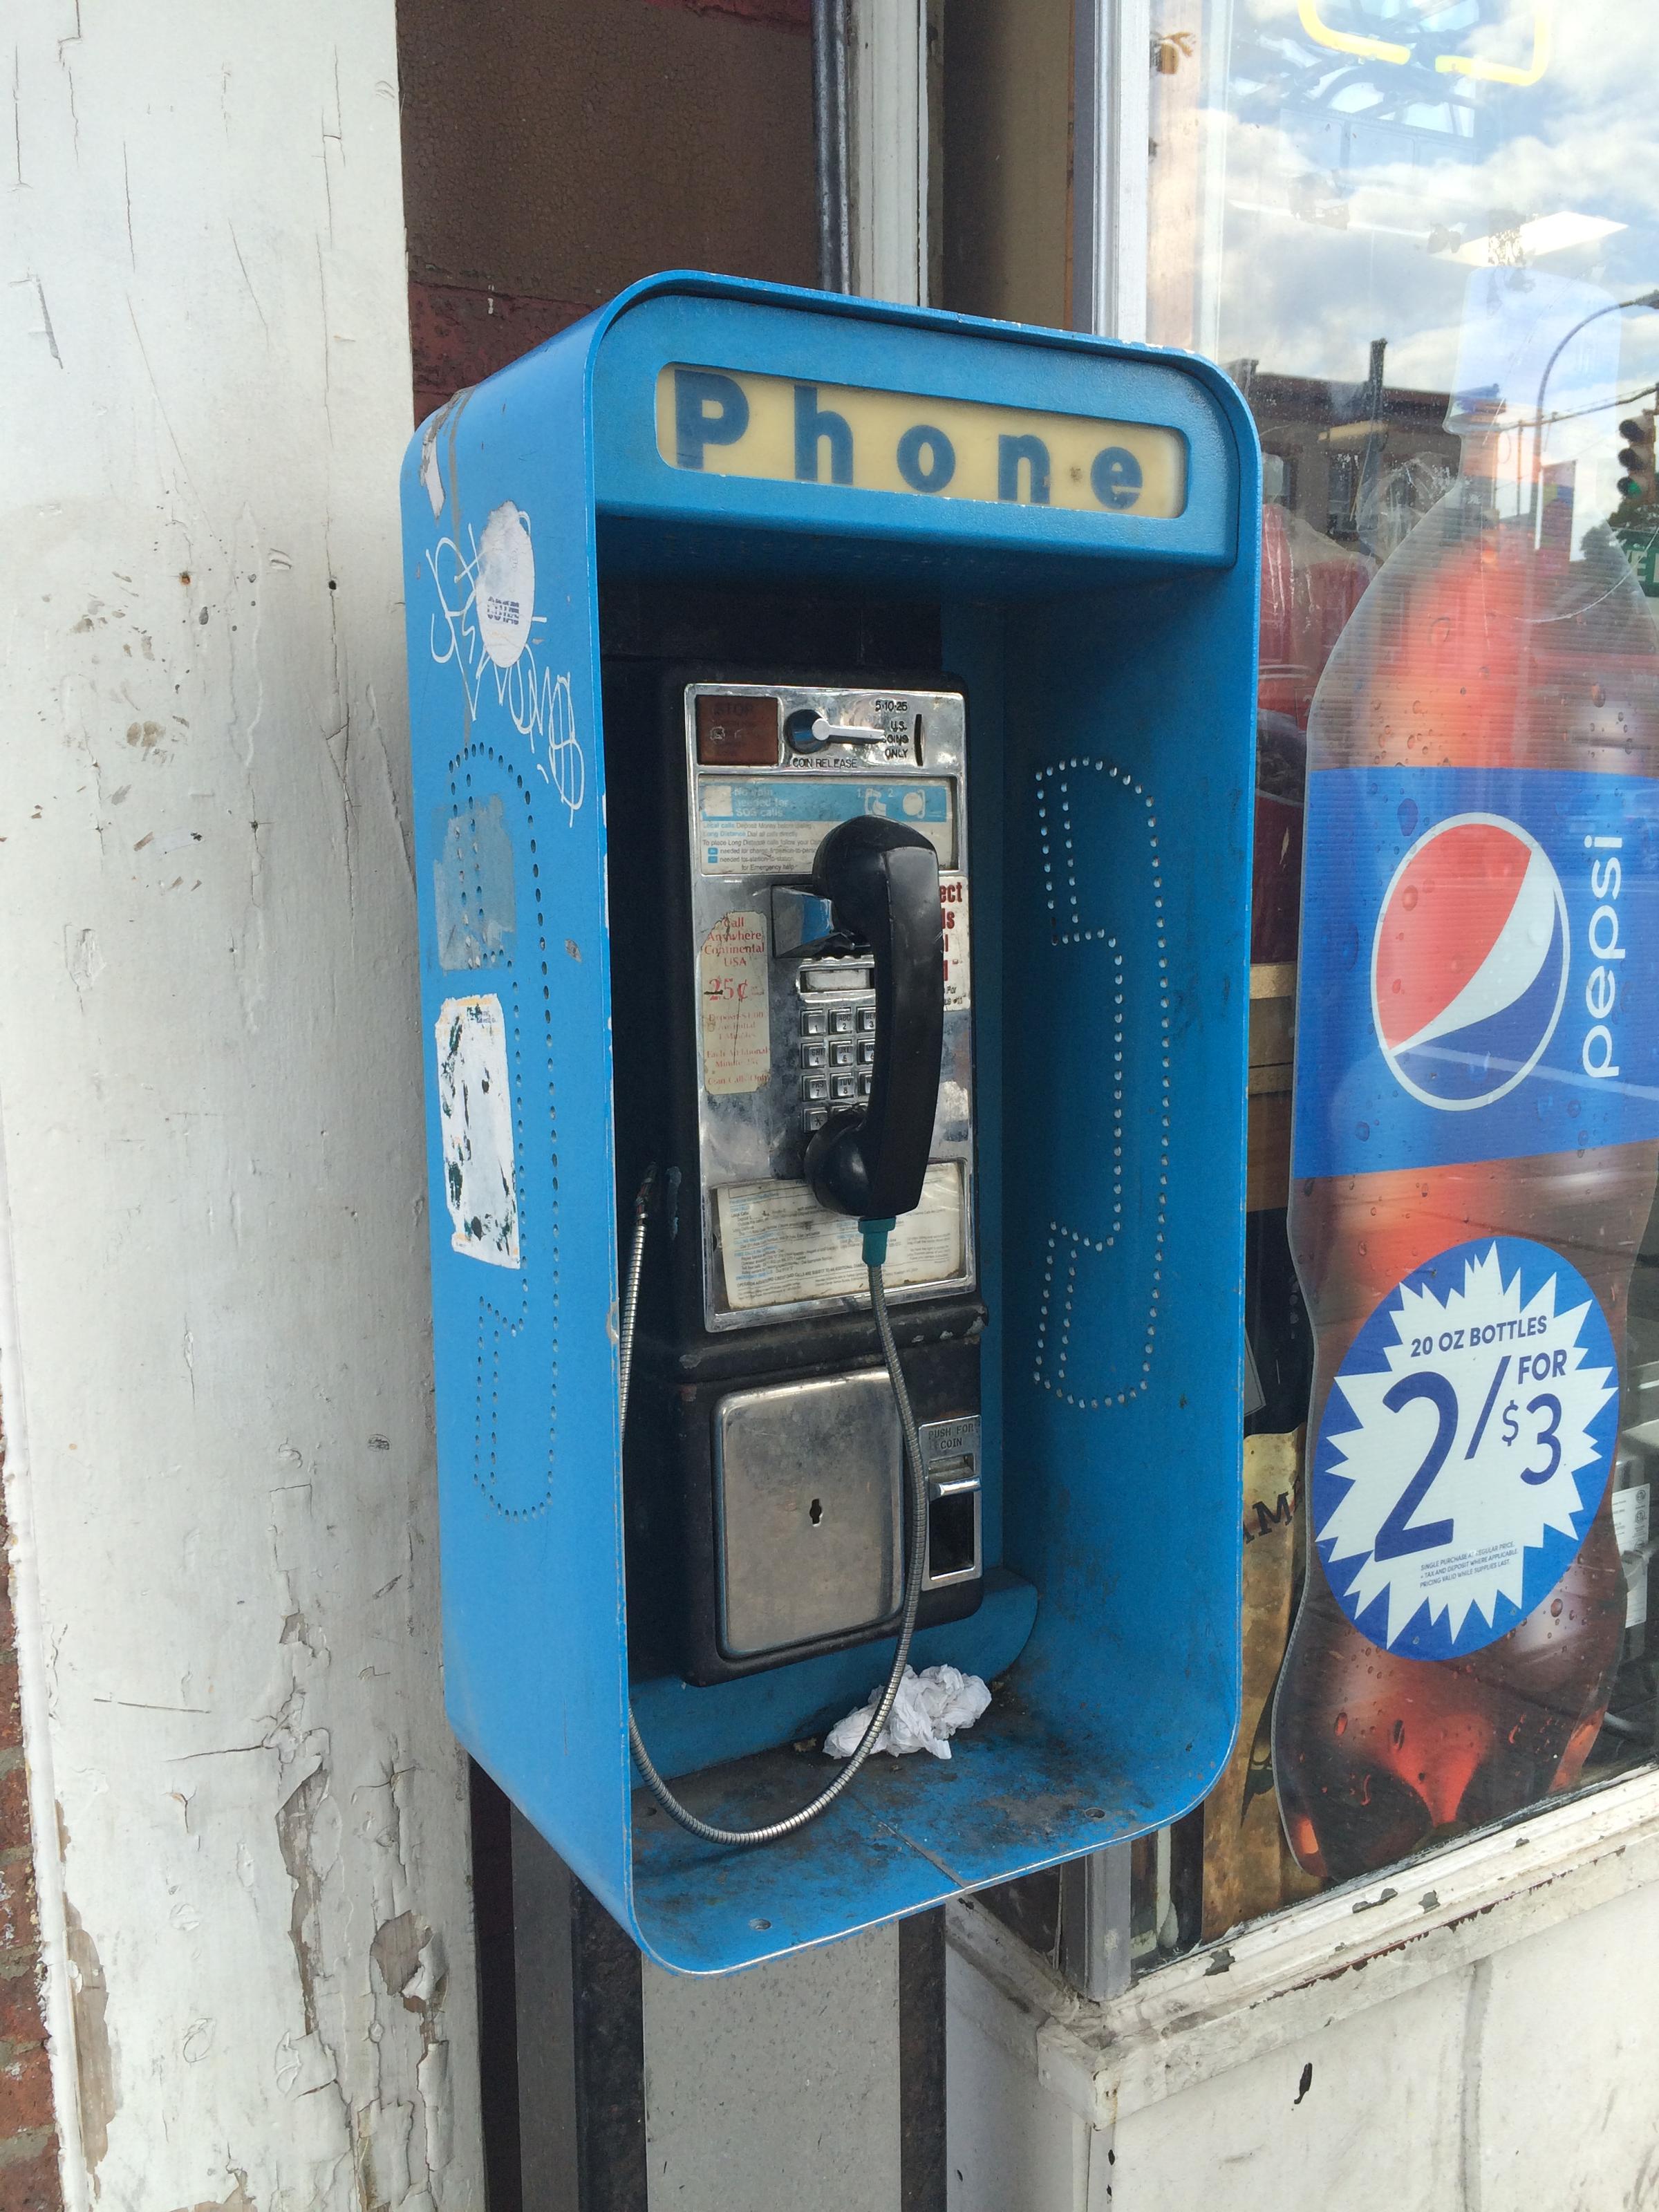 In 2017, Payphones Still Haven't Hung Up | WAMC